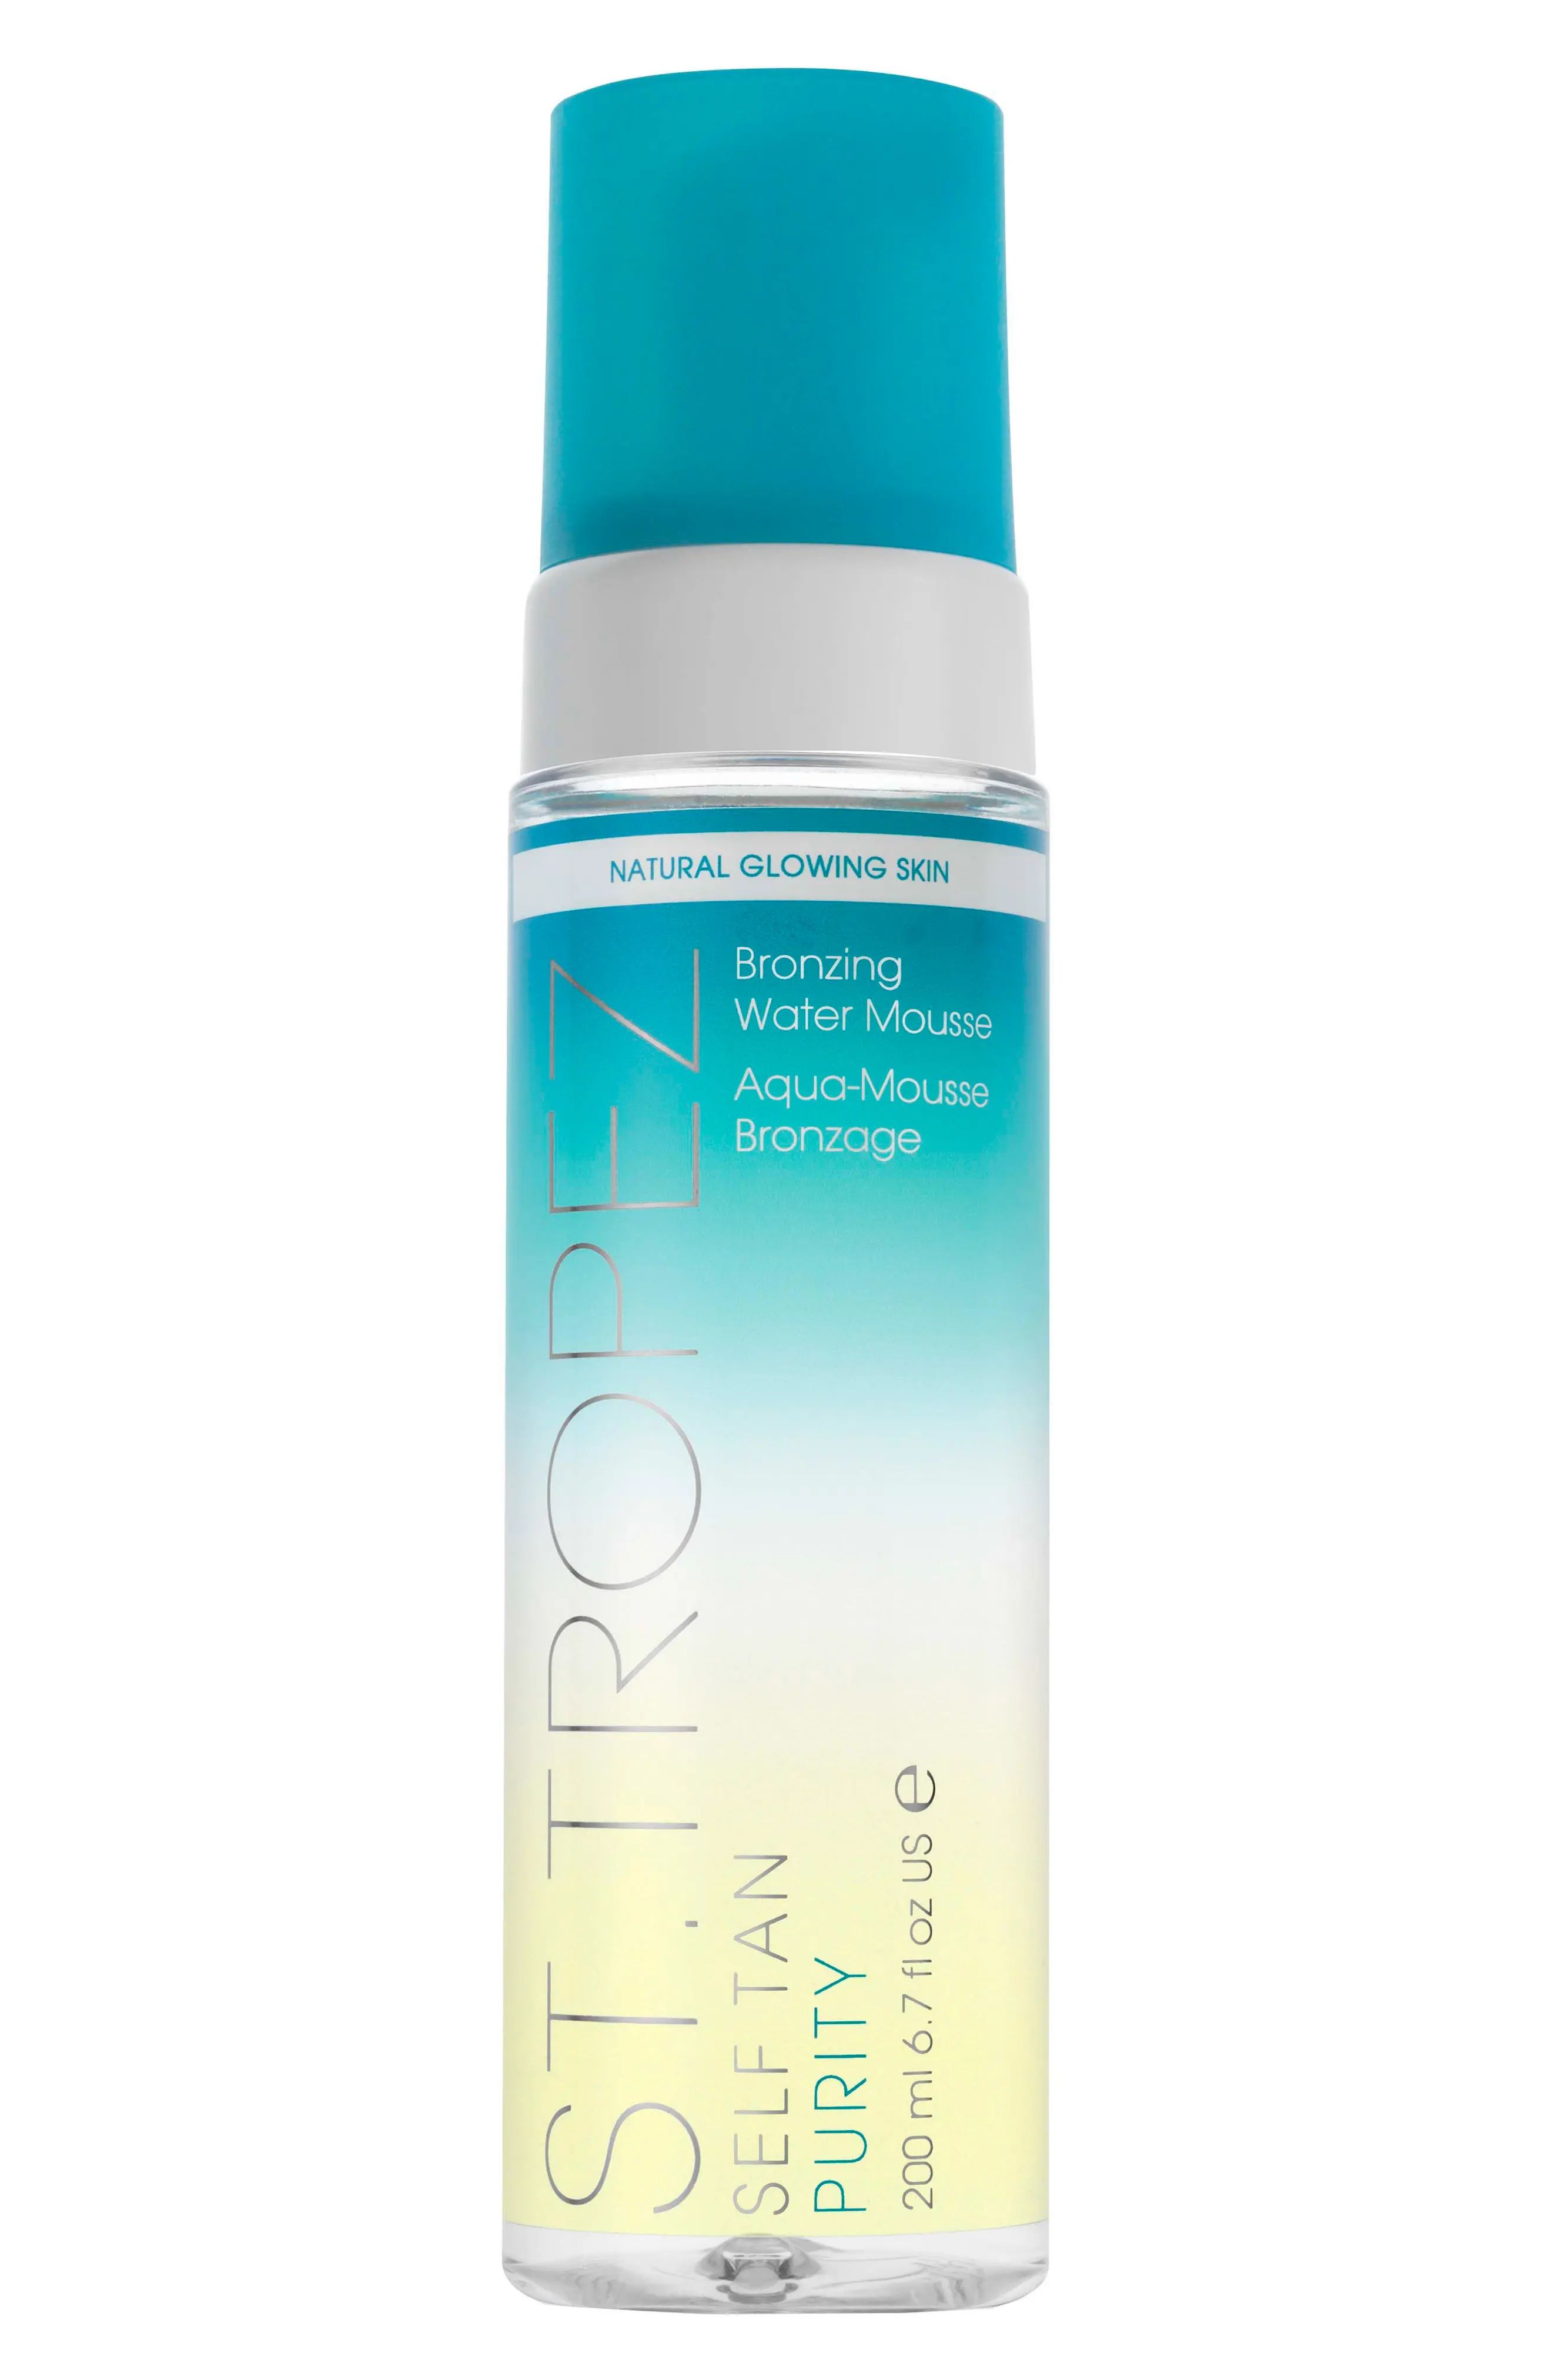 St. Tropez Self Tan Purity Water Mousse | Nordstrom